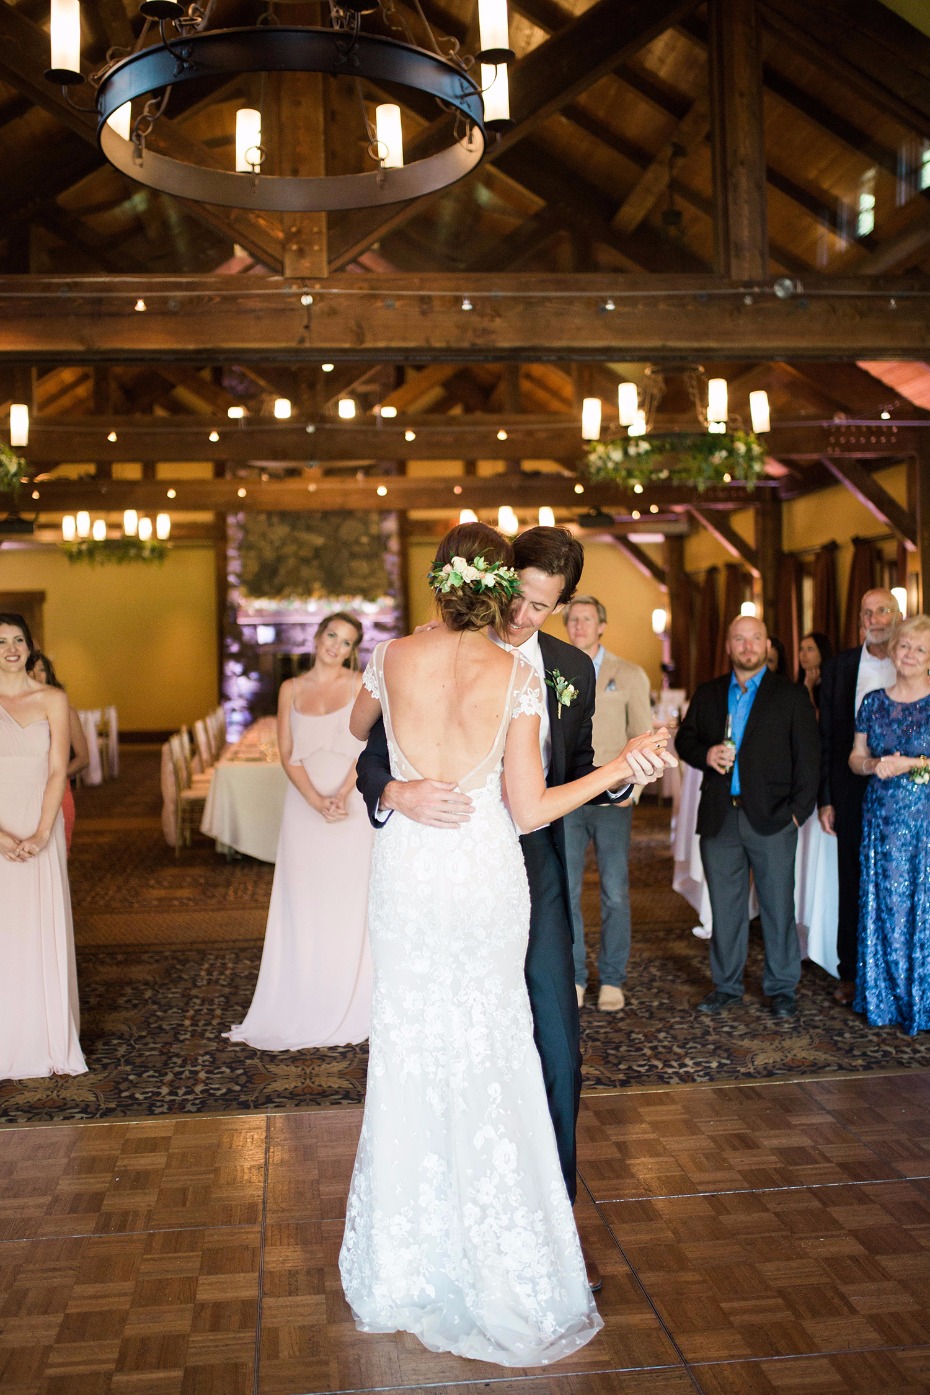 First dance romance for this Canadian Rockies wedding